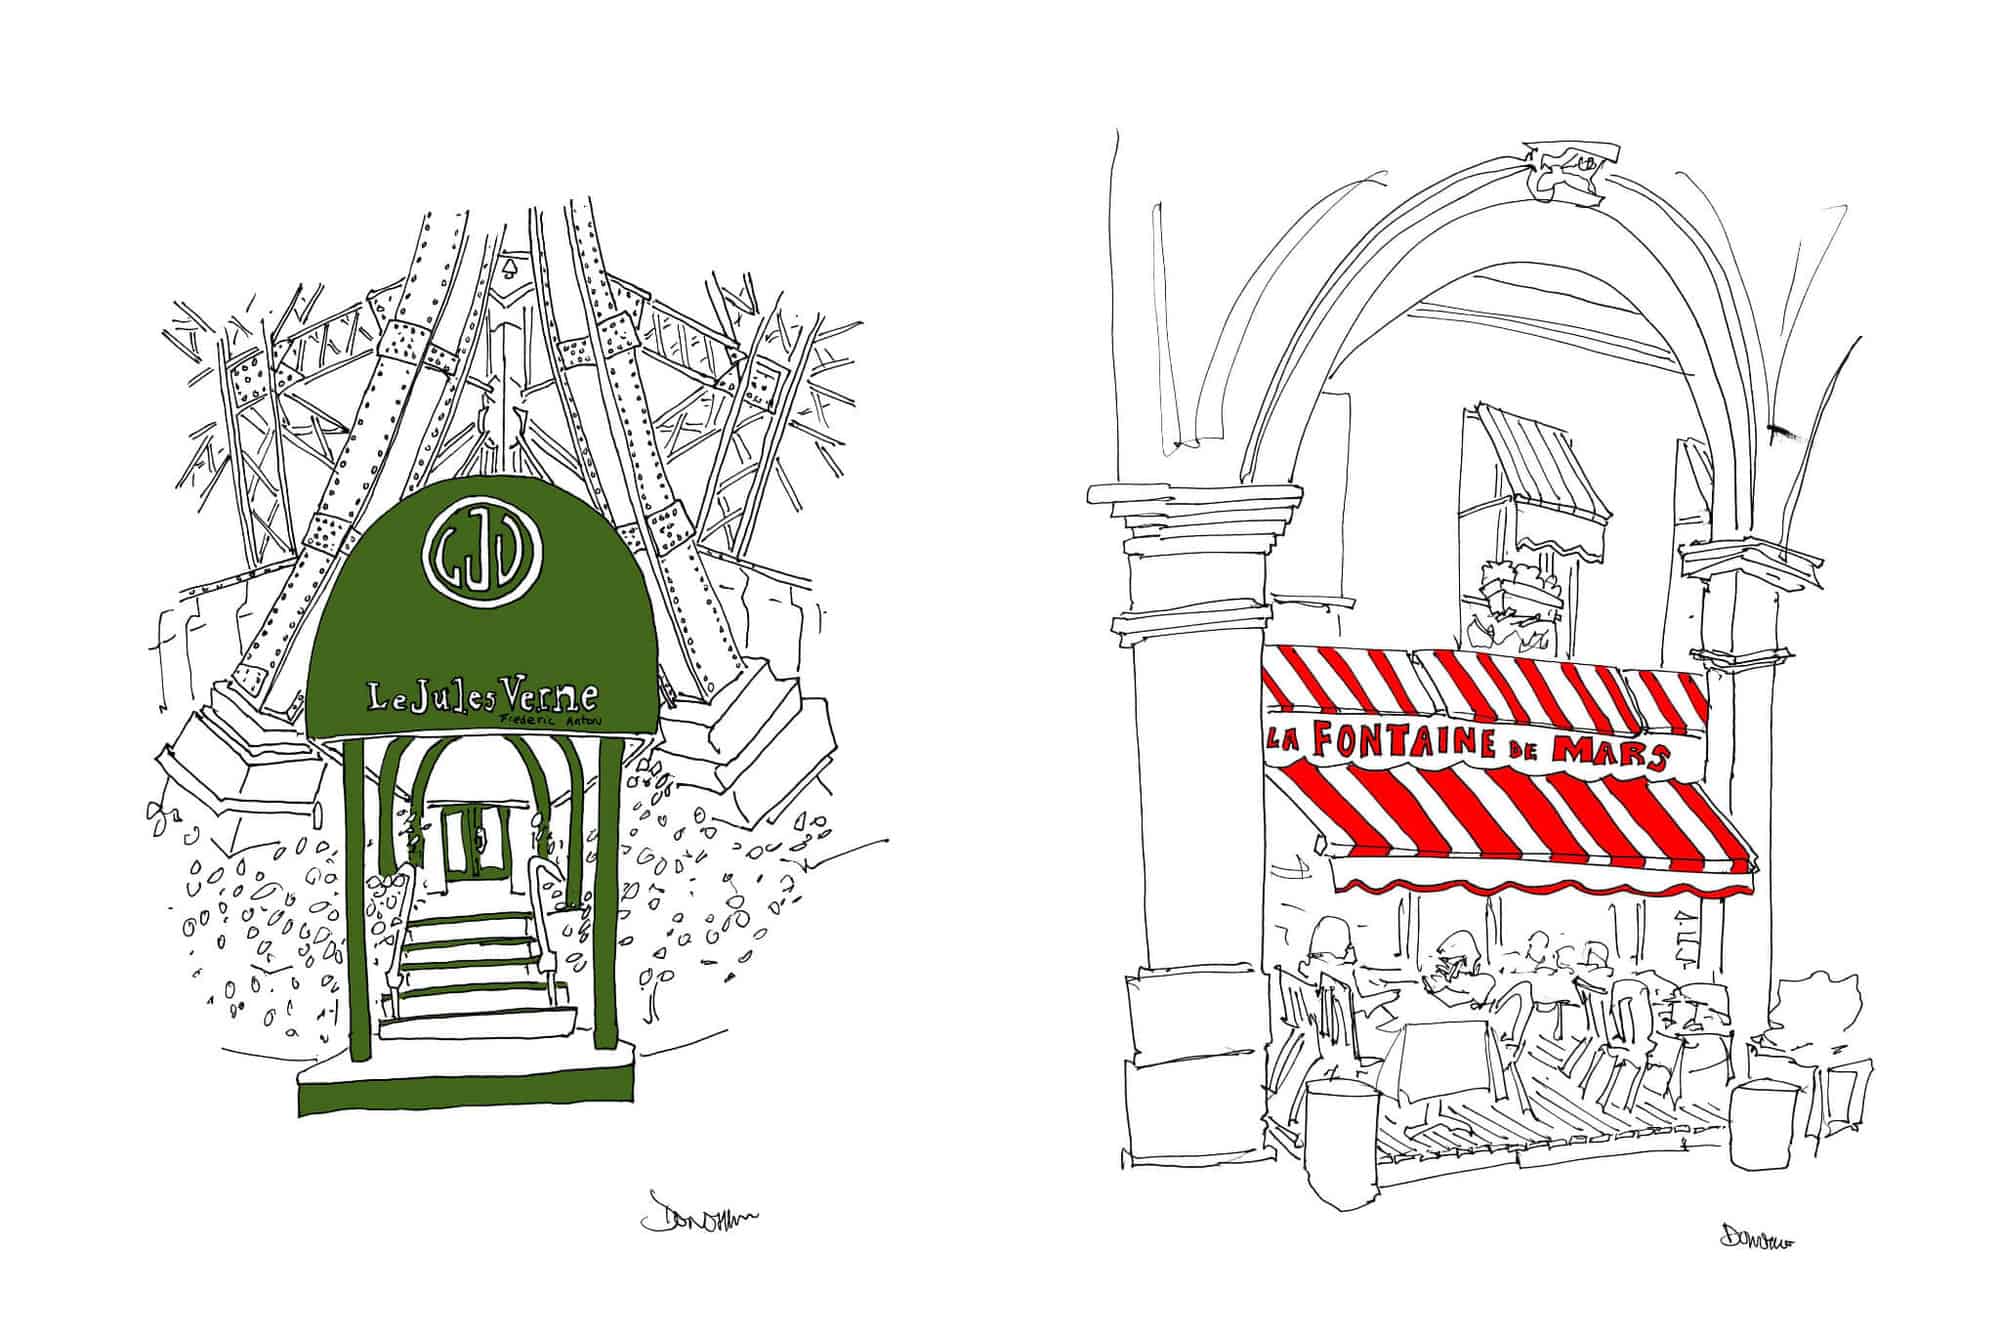 Left: a drawing of the front of Le Jules Verne restaurants at the Eiffel Tower in Paris by John Donohue. Right: a drawing of La Fontaine de Mars restaurant in Paris by John Donohue.